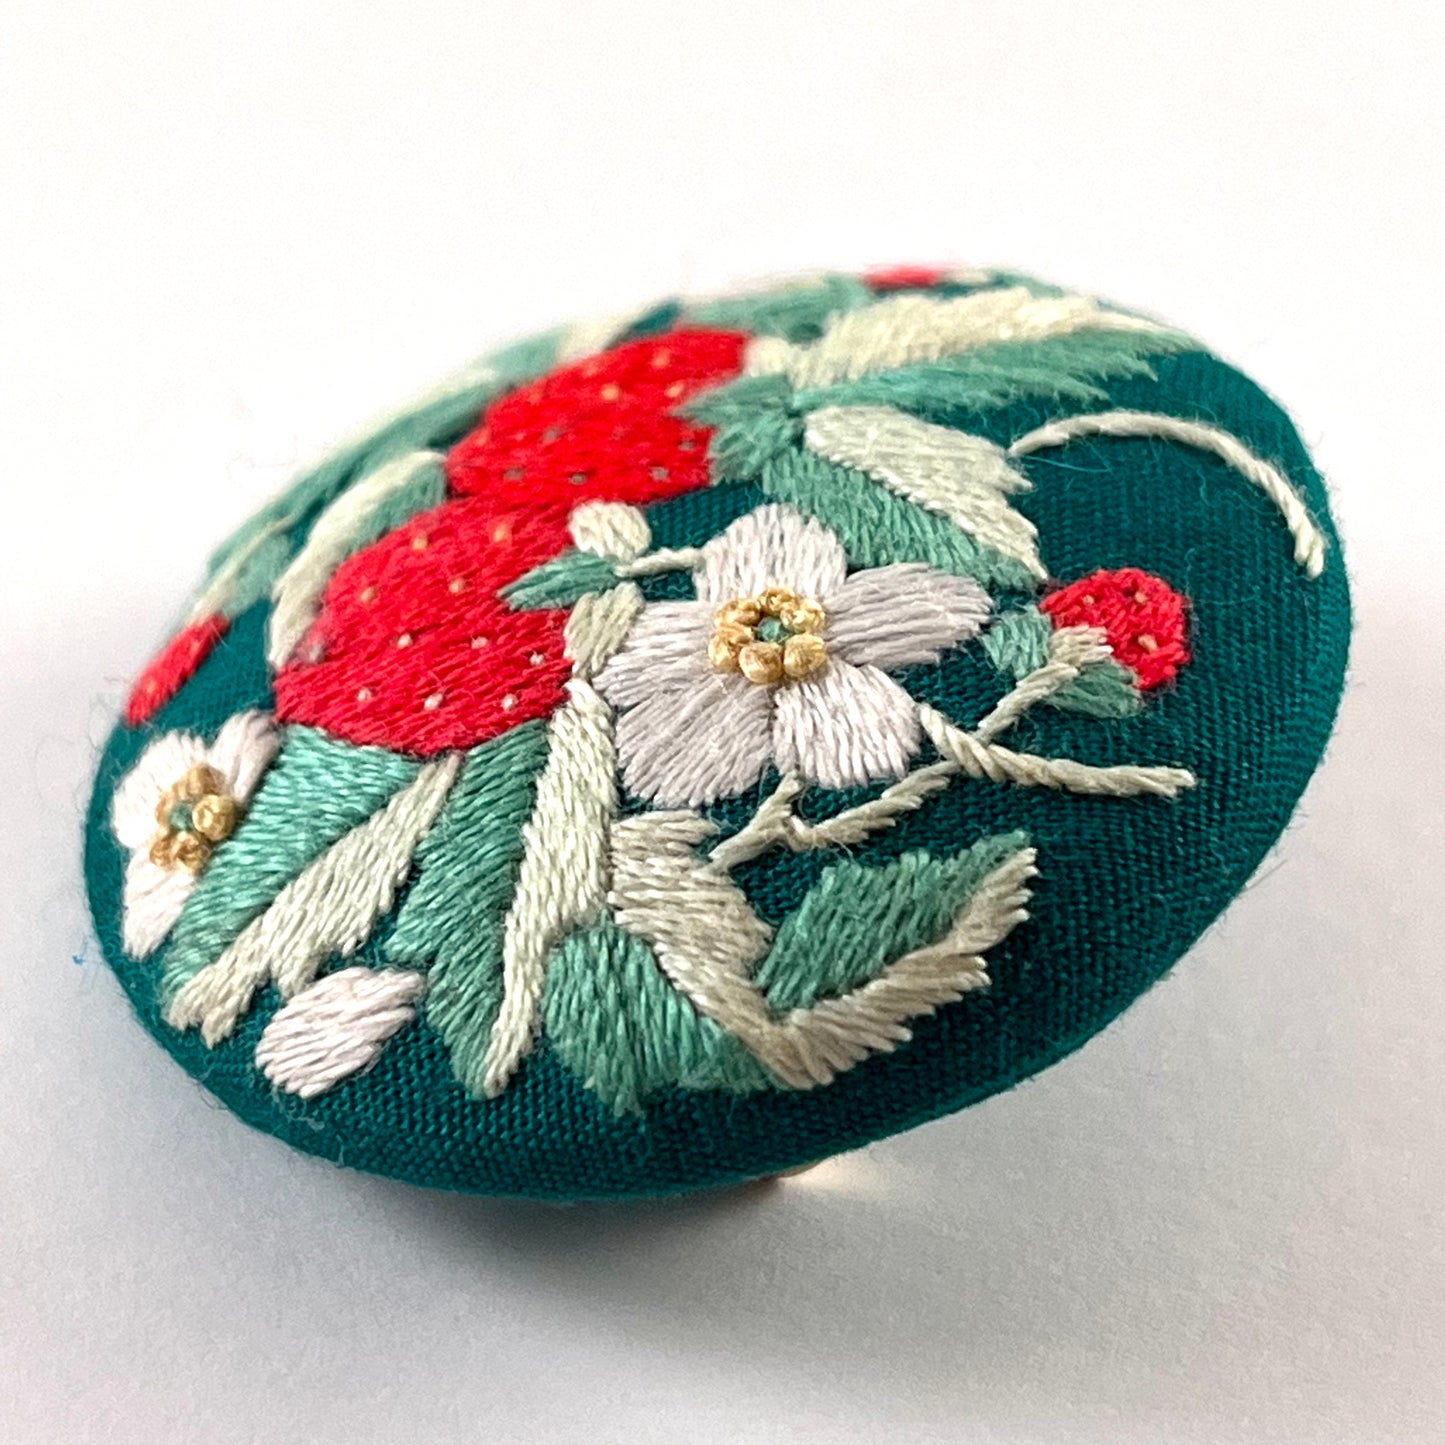 70s/80s Embroidered Strawberry Pin